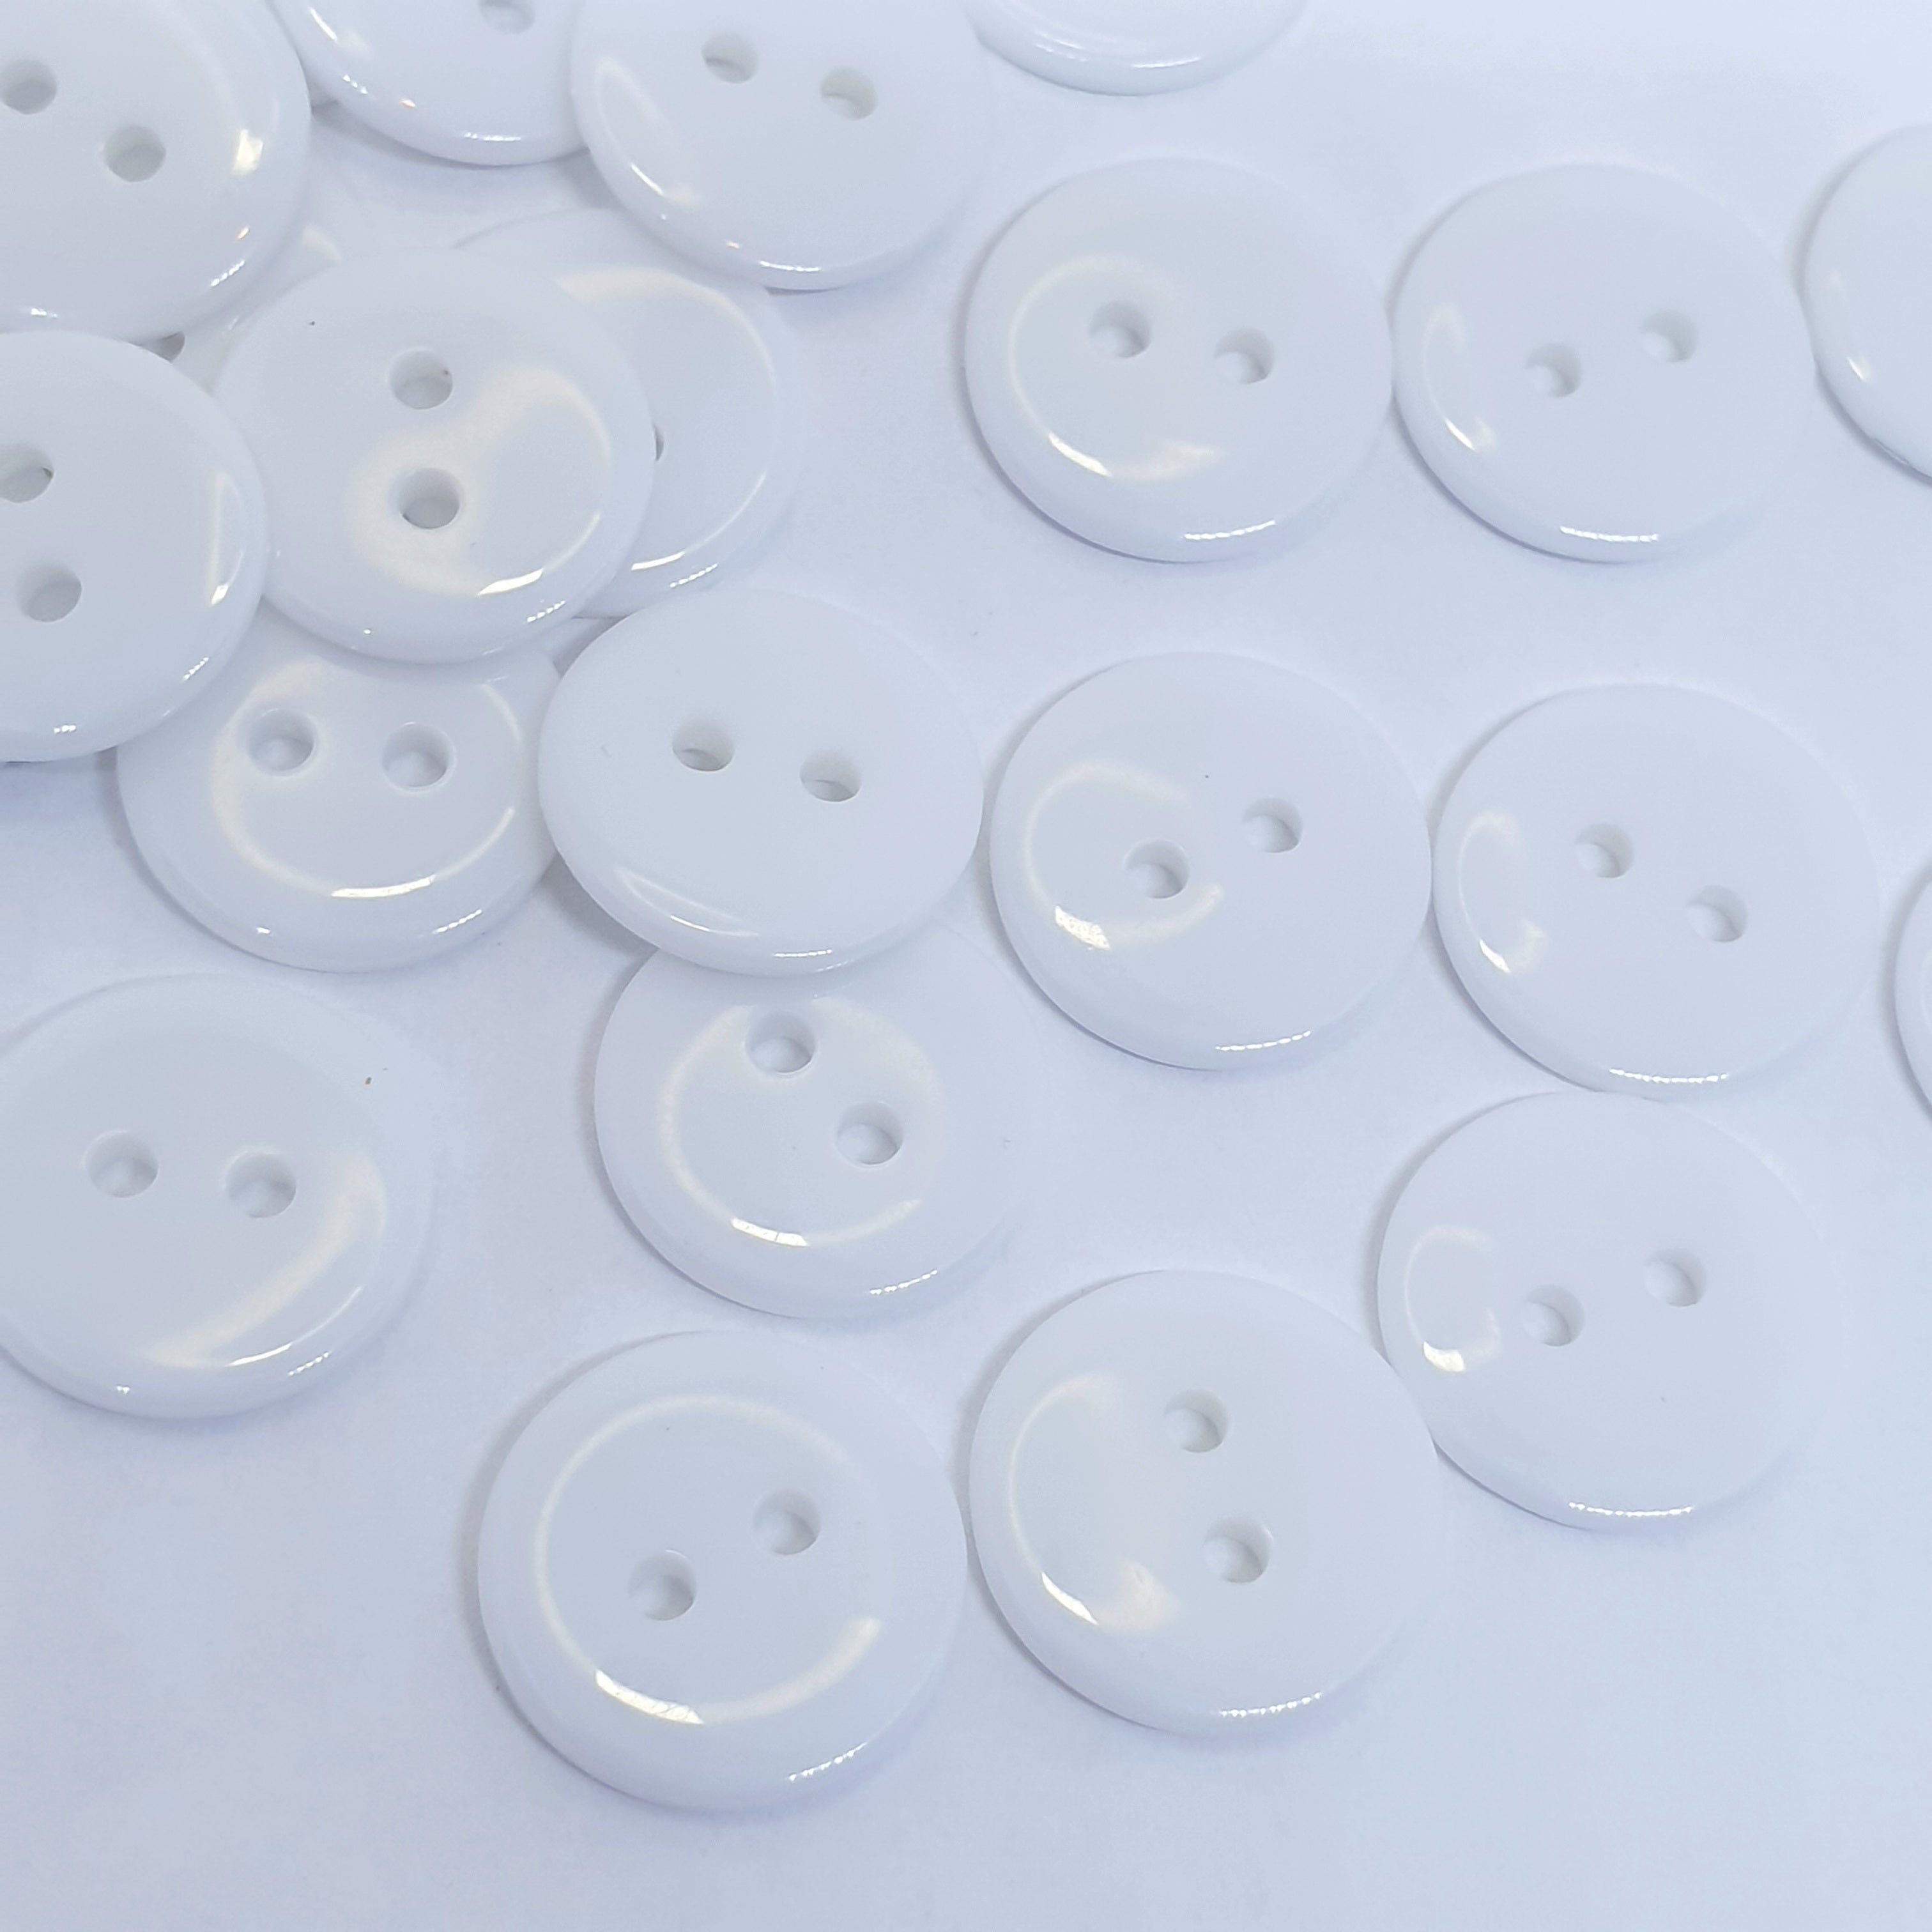 MajorCrafts 48pcs 20mm Glossy White 2 Holes Round Resin Sewing Buttons